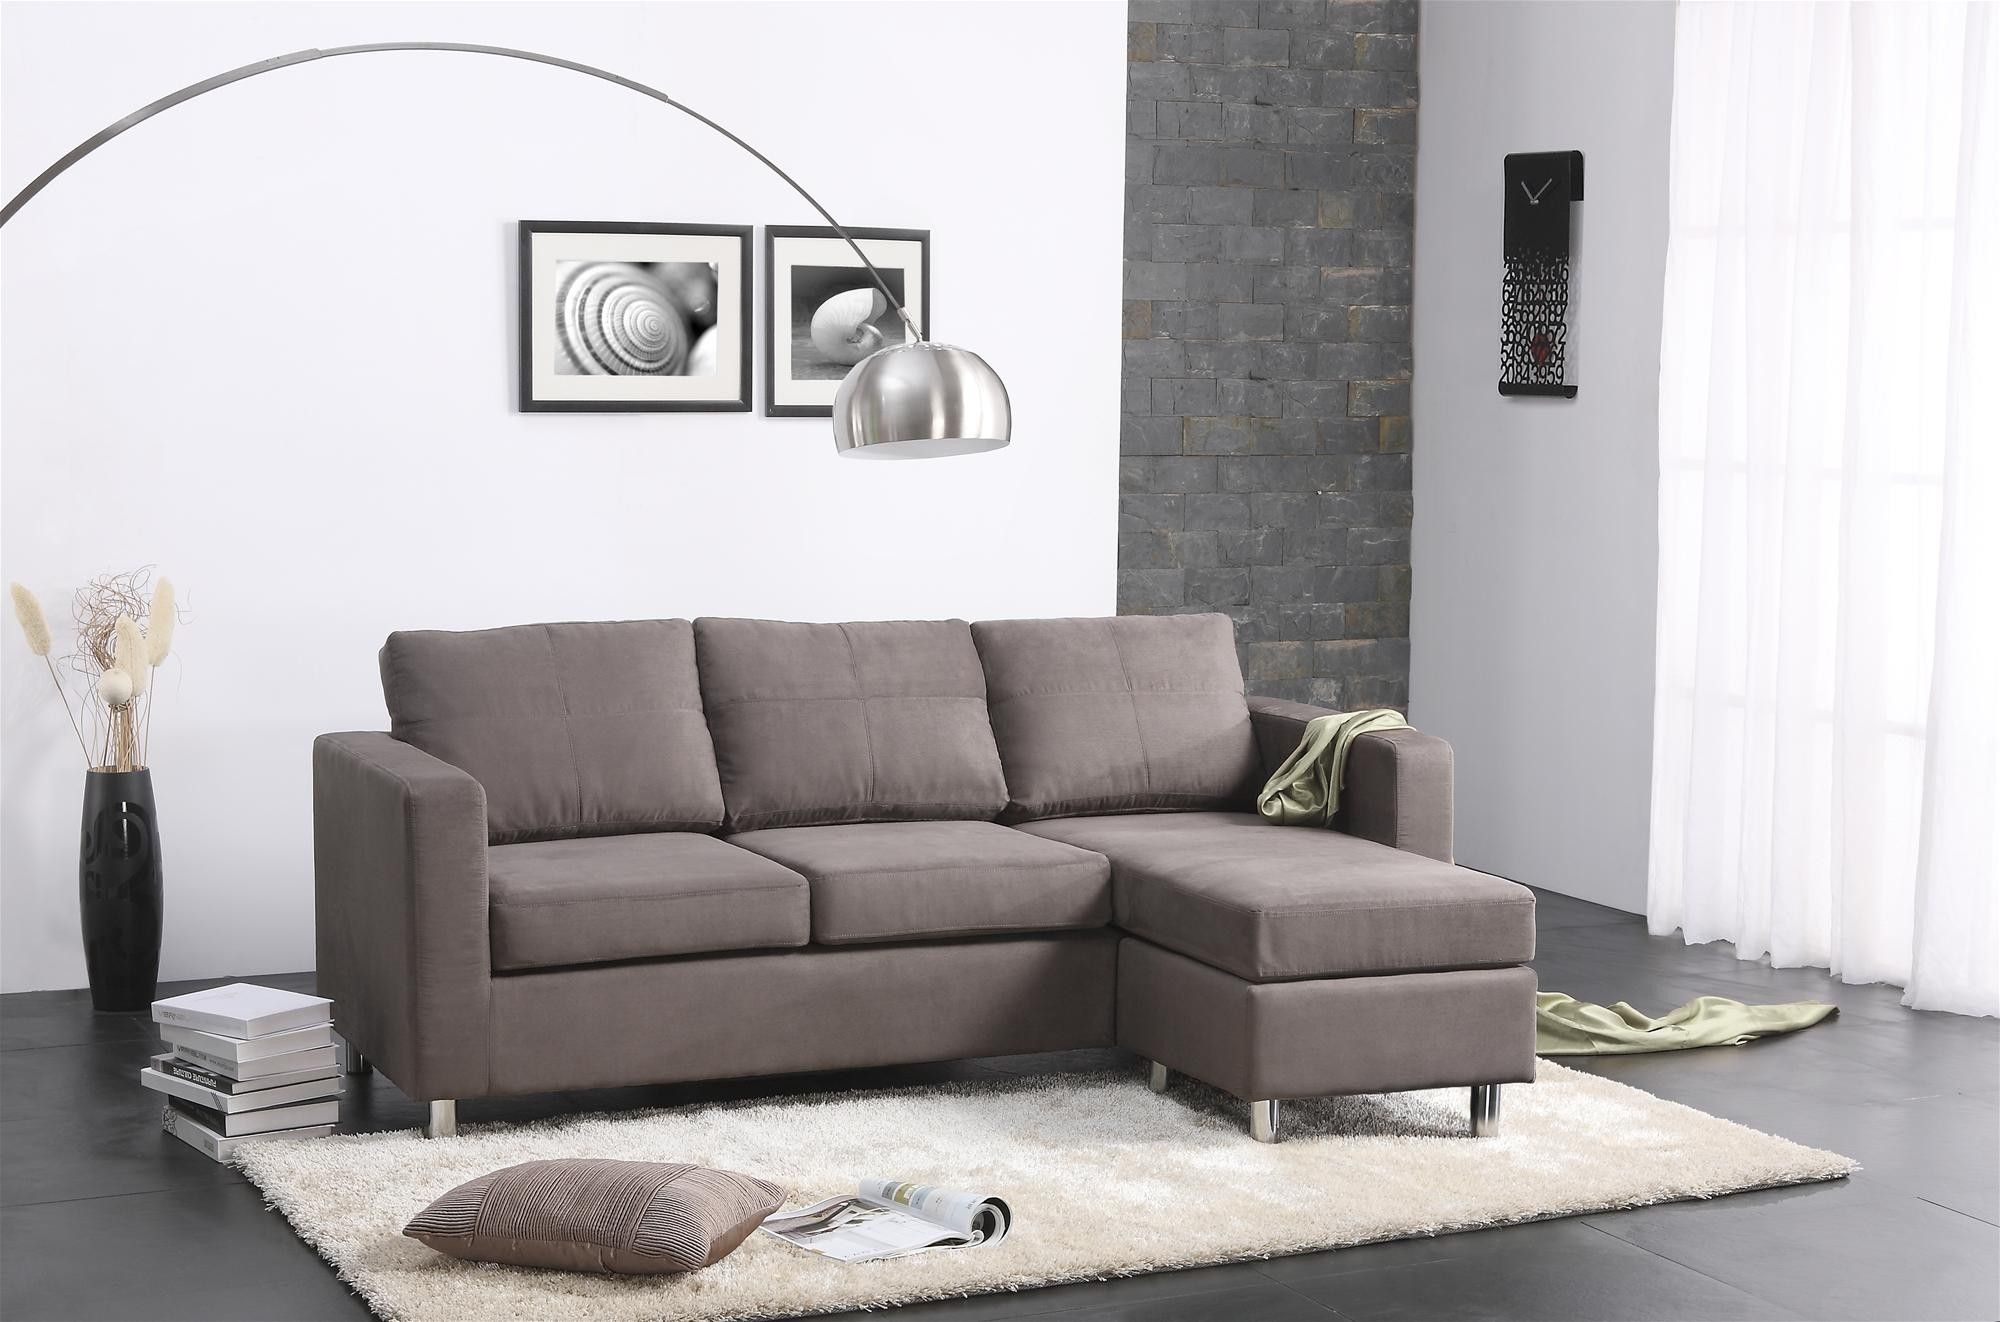 Incredible Small Space Sectional Sofa #1606 : Furniture – Best Inside Narrow Spaces Sectional Sofas (View 8 of 10)